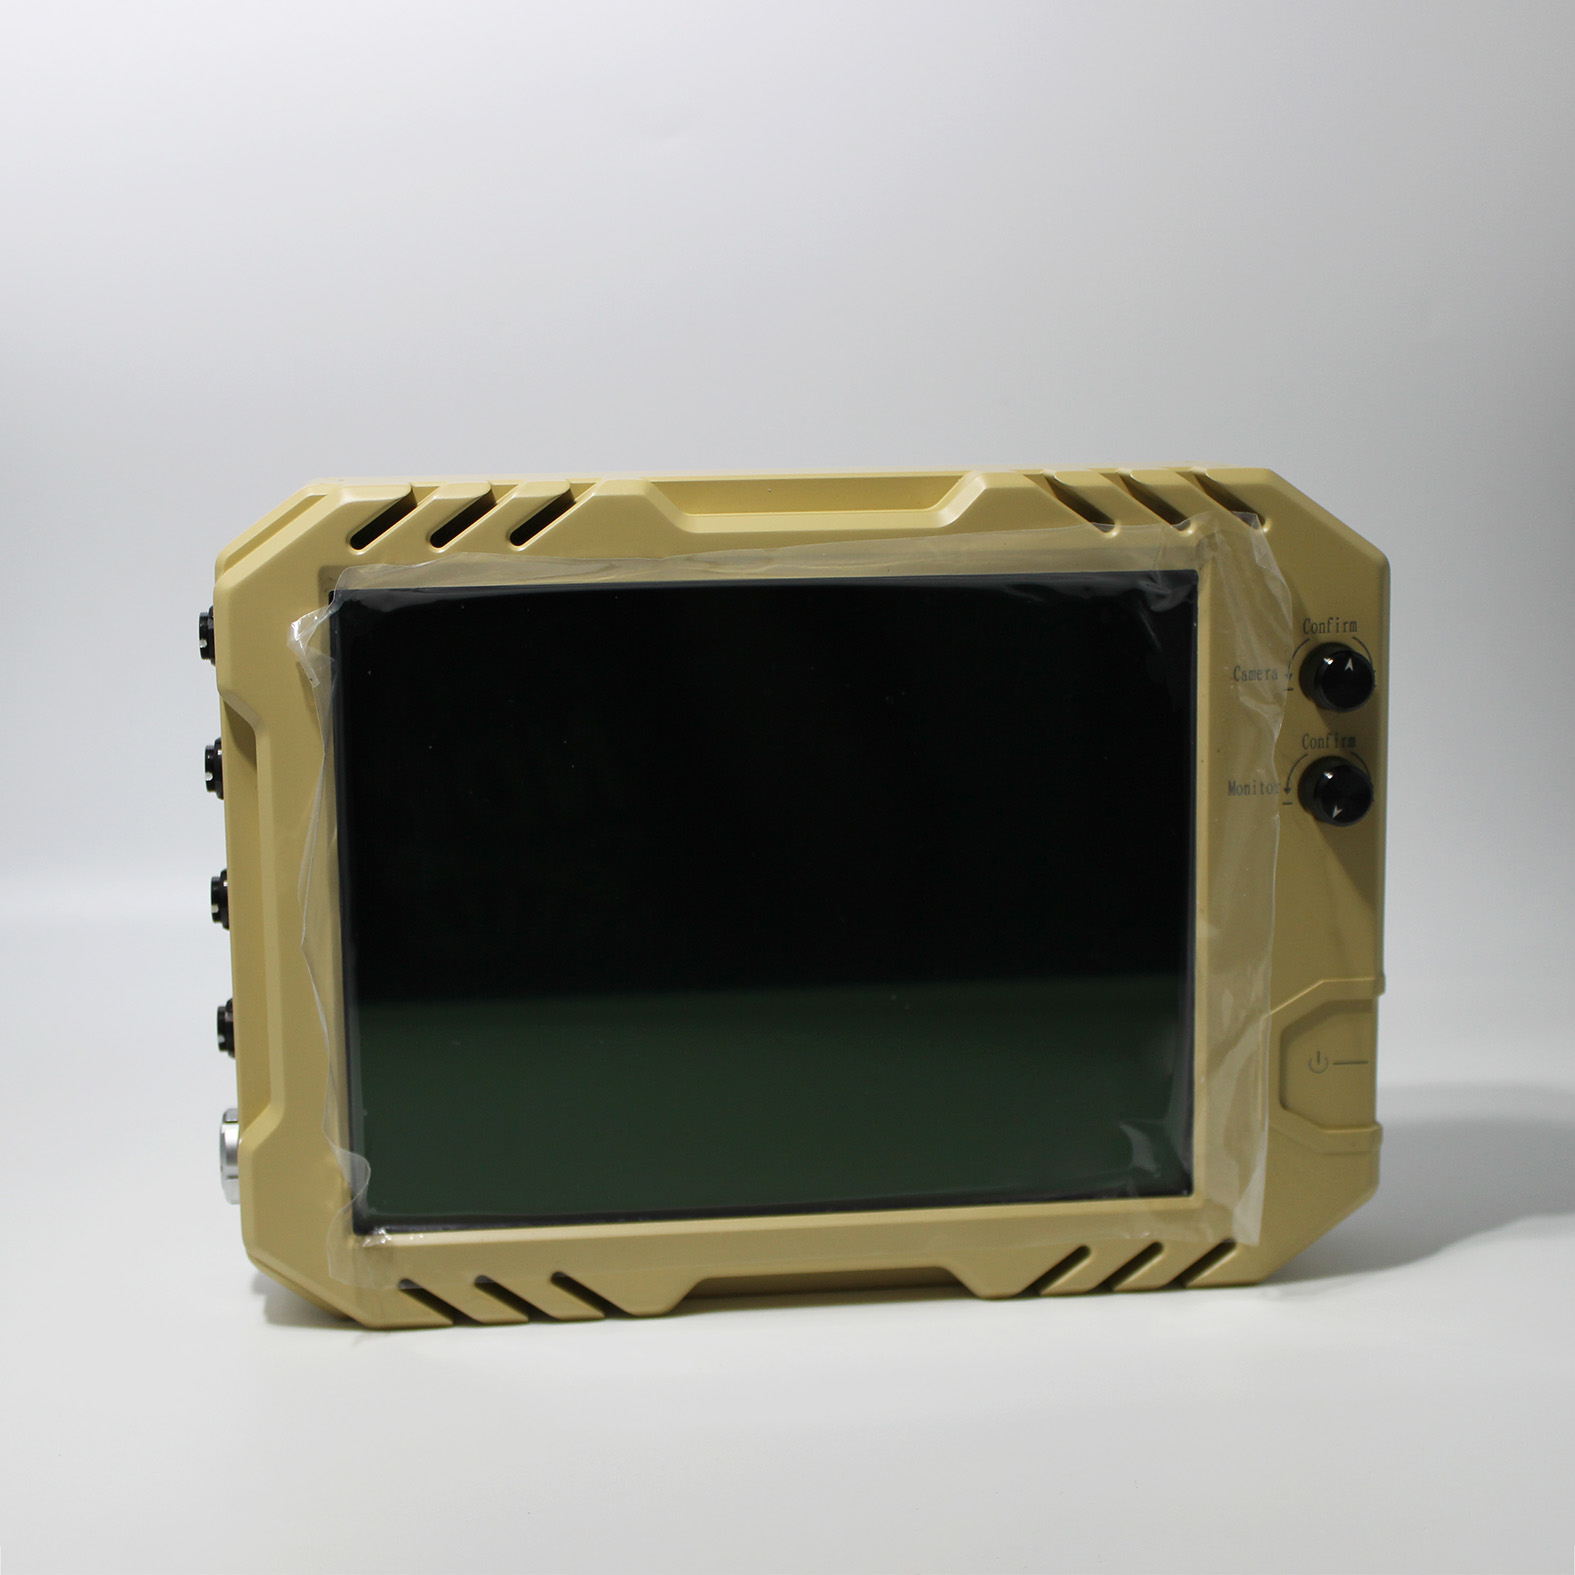 China Supplier OEM ODM Spike-BF Automobile Thermal Imager Display